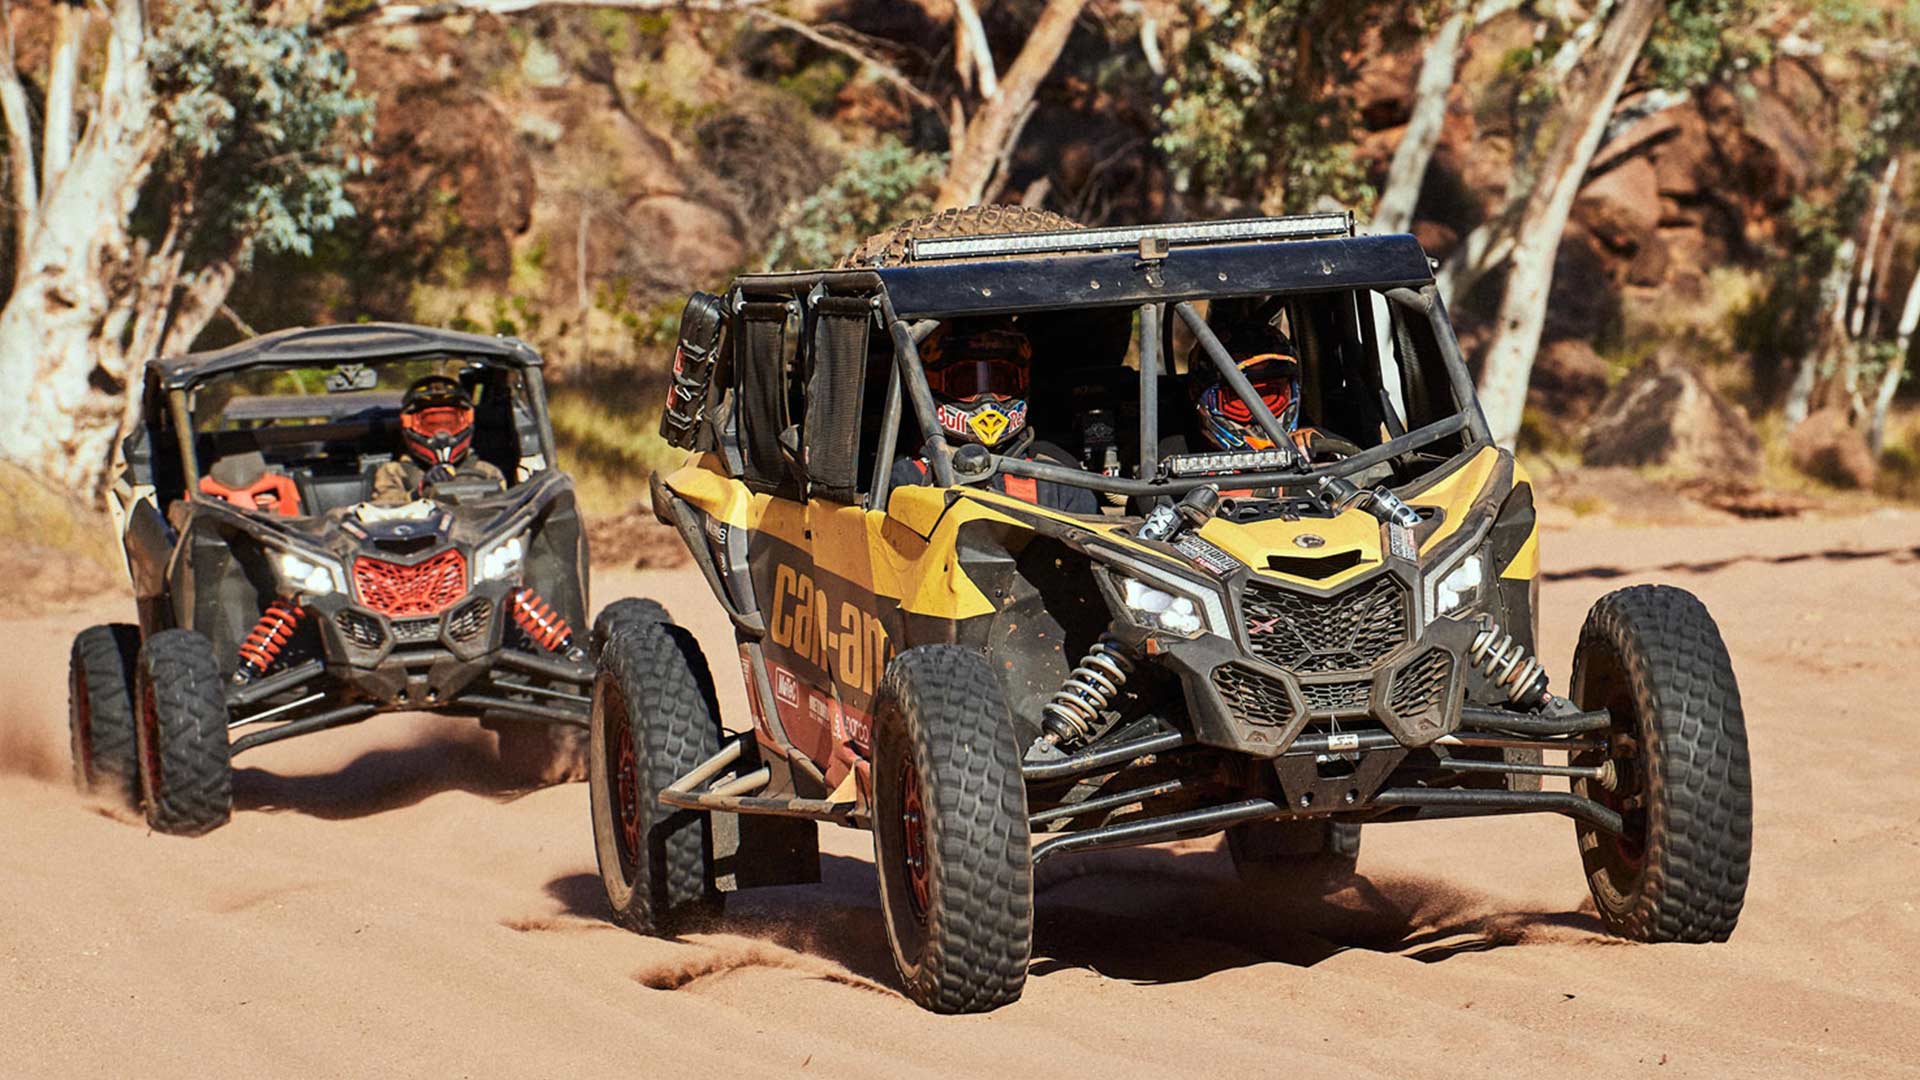 Two CAn-Am MAverick X3 following each others in the desert